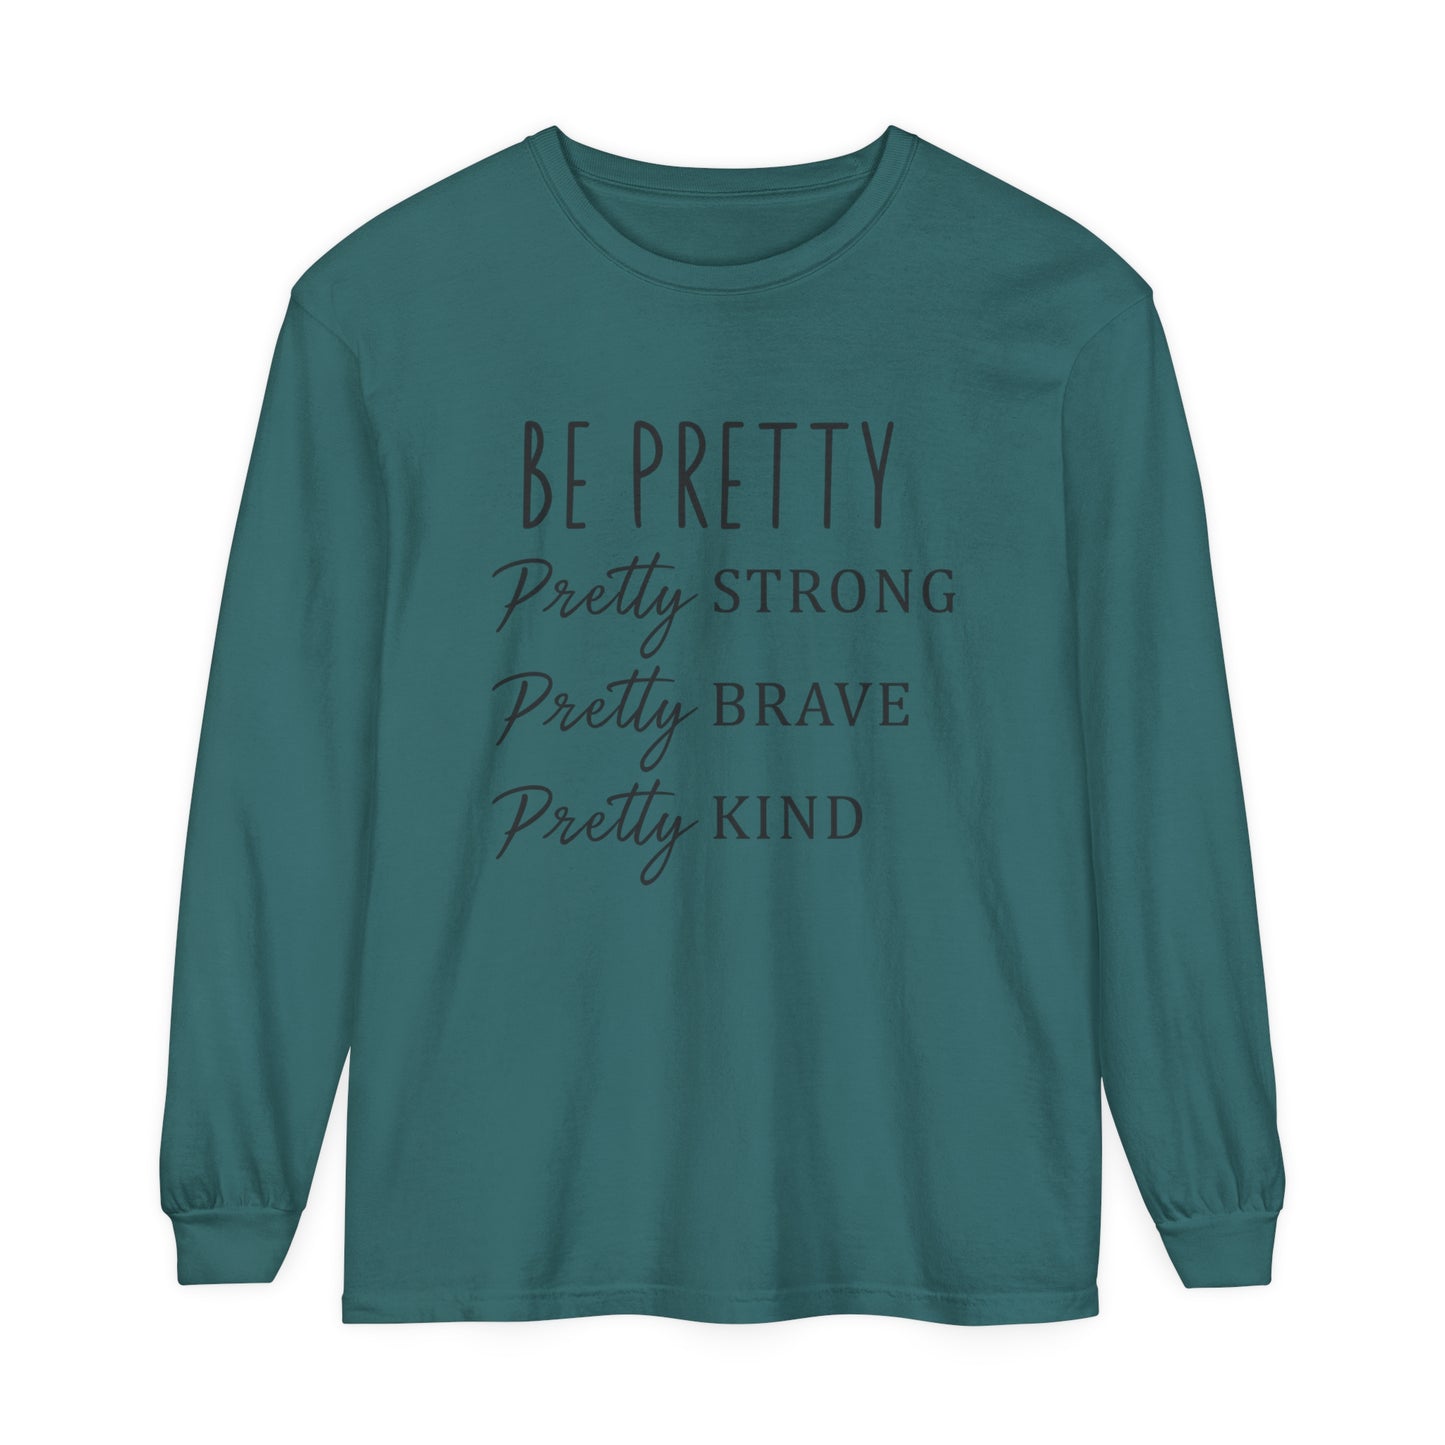 Be Pretty Strong Brave Kind Women's Loose Long Sleeve T-Shirt